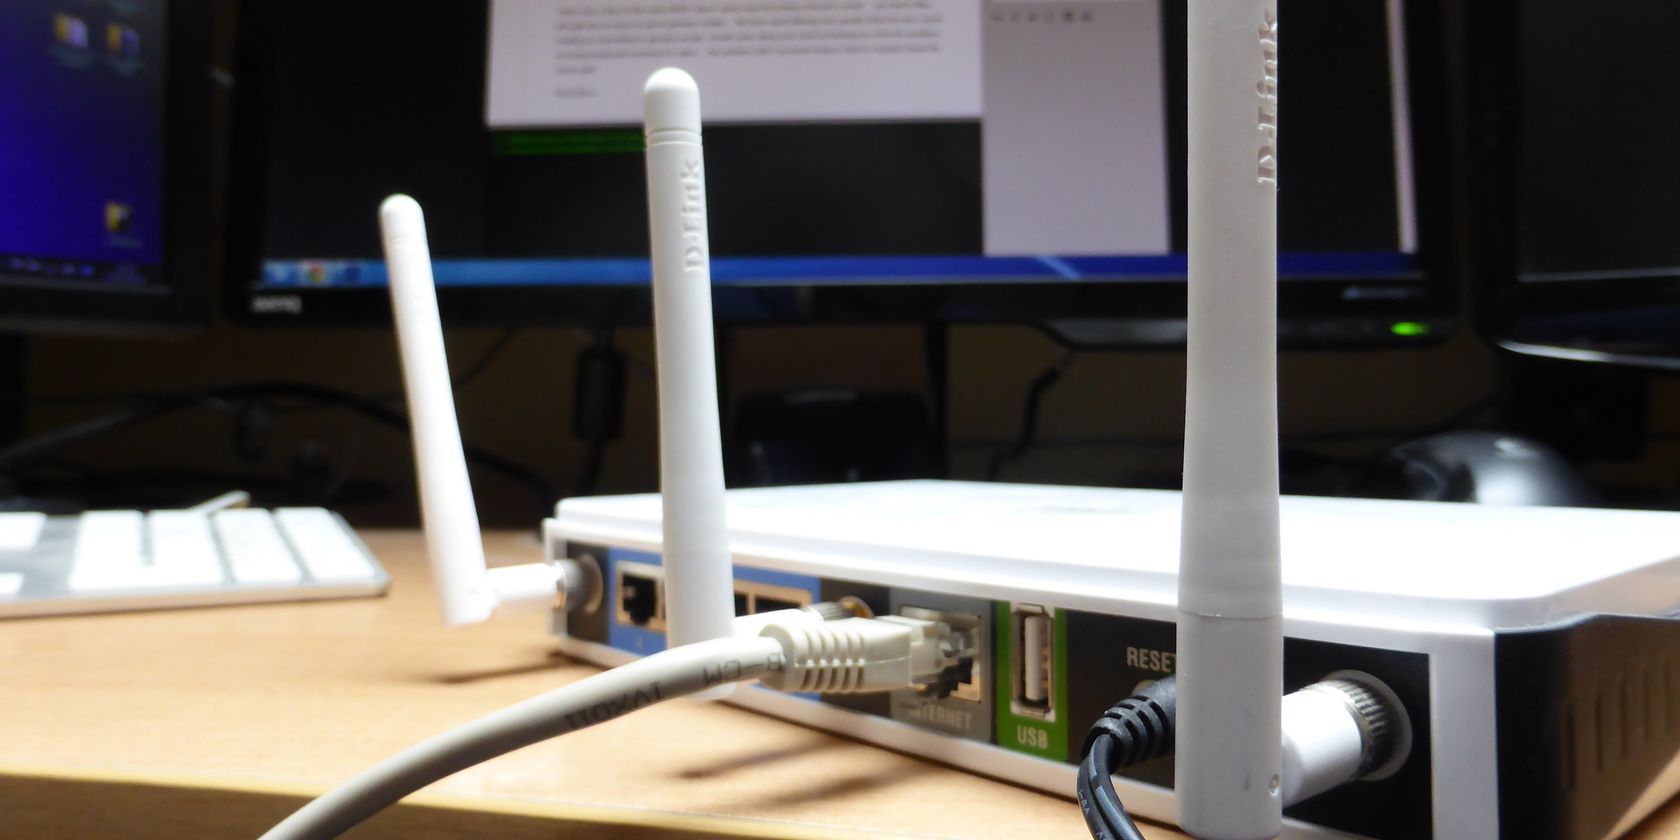 DLink-3x3-MIMO-Router